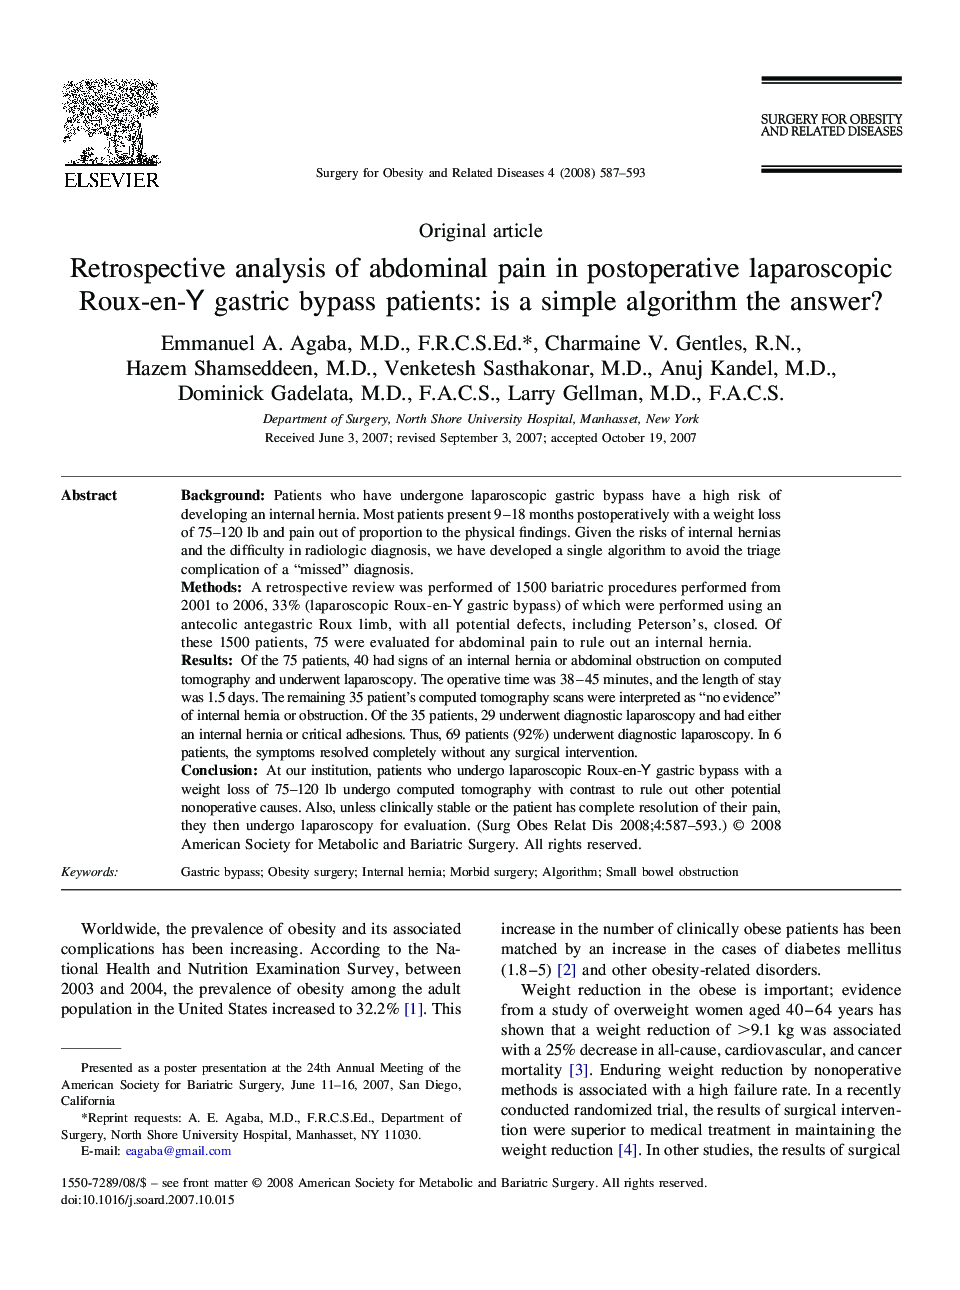 Retrospective analysis of abdominal pain in postoperative laparoscopic Roux-en-Y gastric bypass patients: is a simple algorithm the answer?